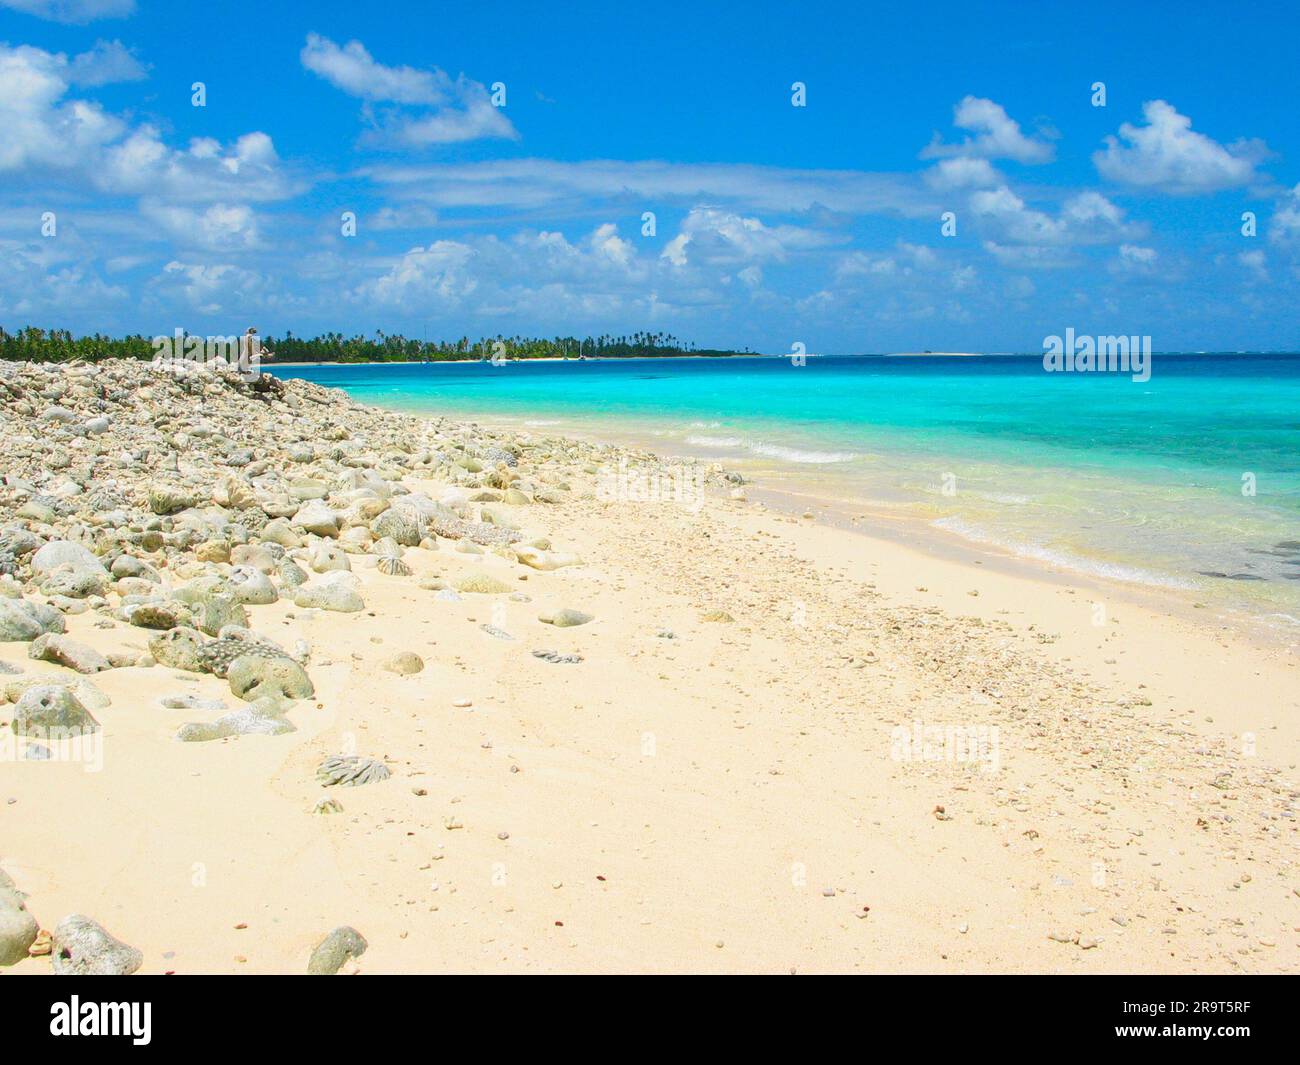 Coral beach, anchorage and cruising sailboats at Cocos Keeling Islands, Indian Ocean, Australia. Stock Photo